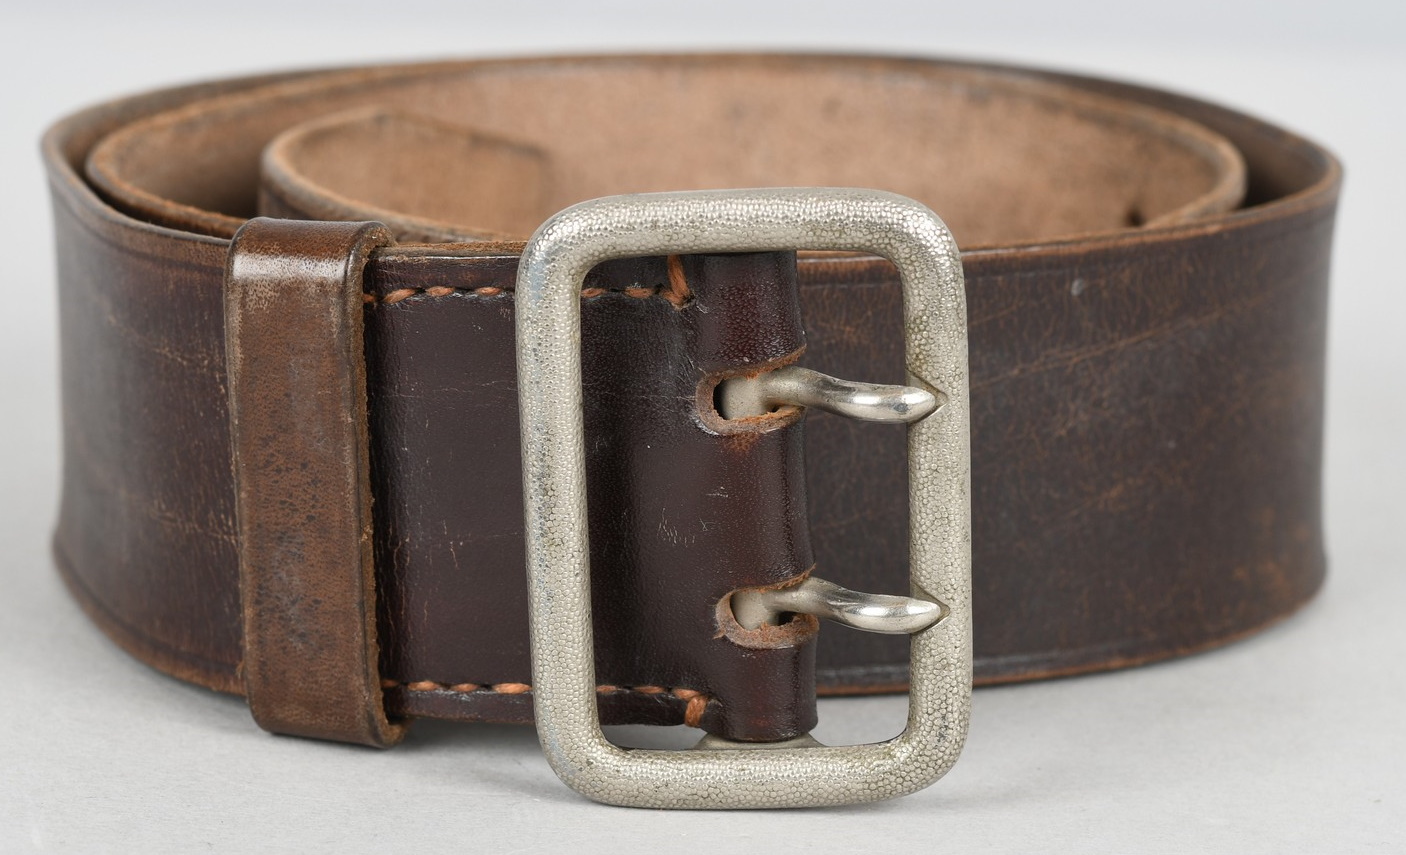 NSDAP/Political Leader's Belt And Open Claw Buckle